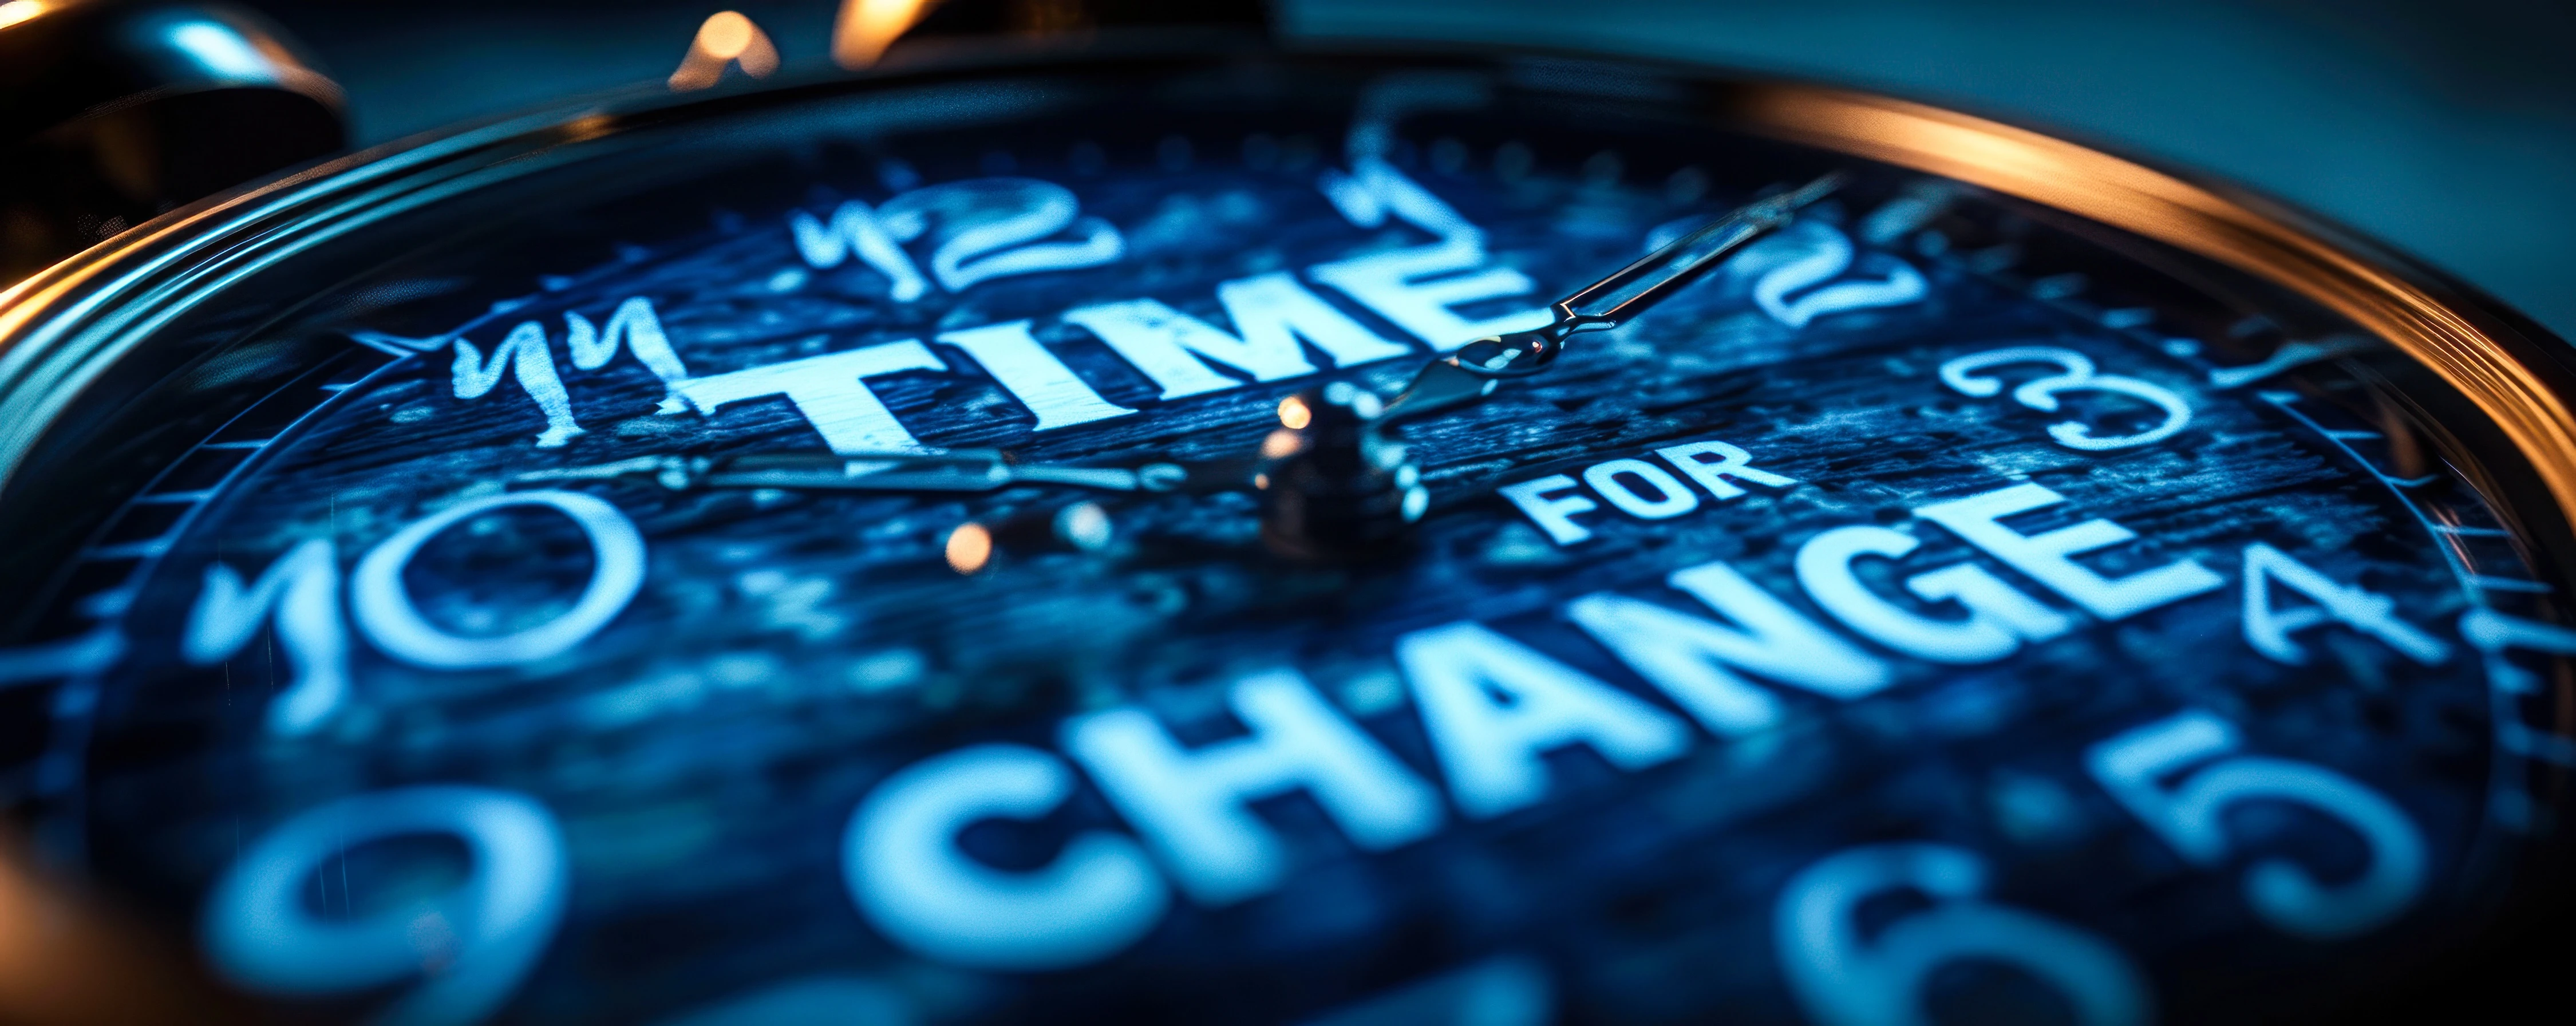 Blue clock face with the words "Time for change"